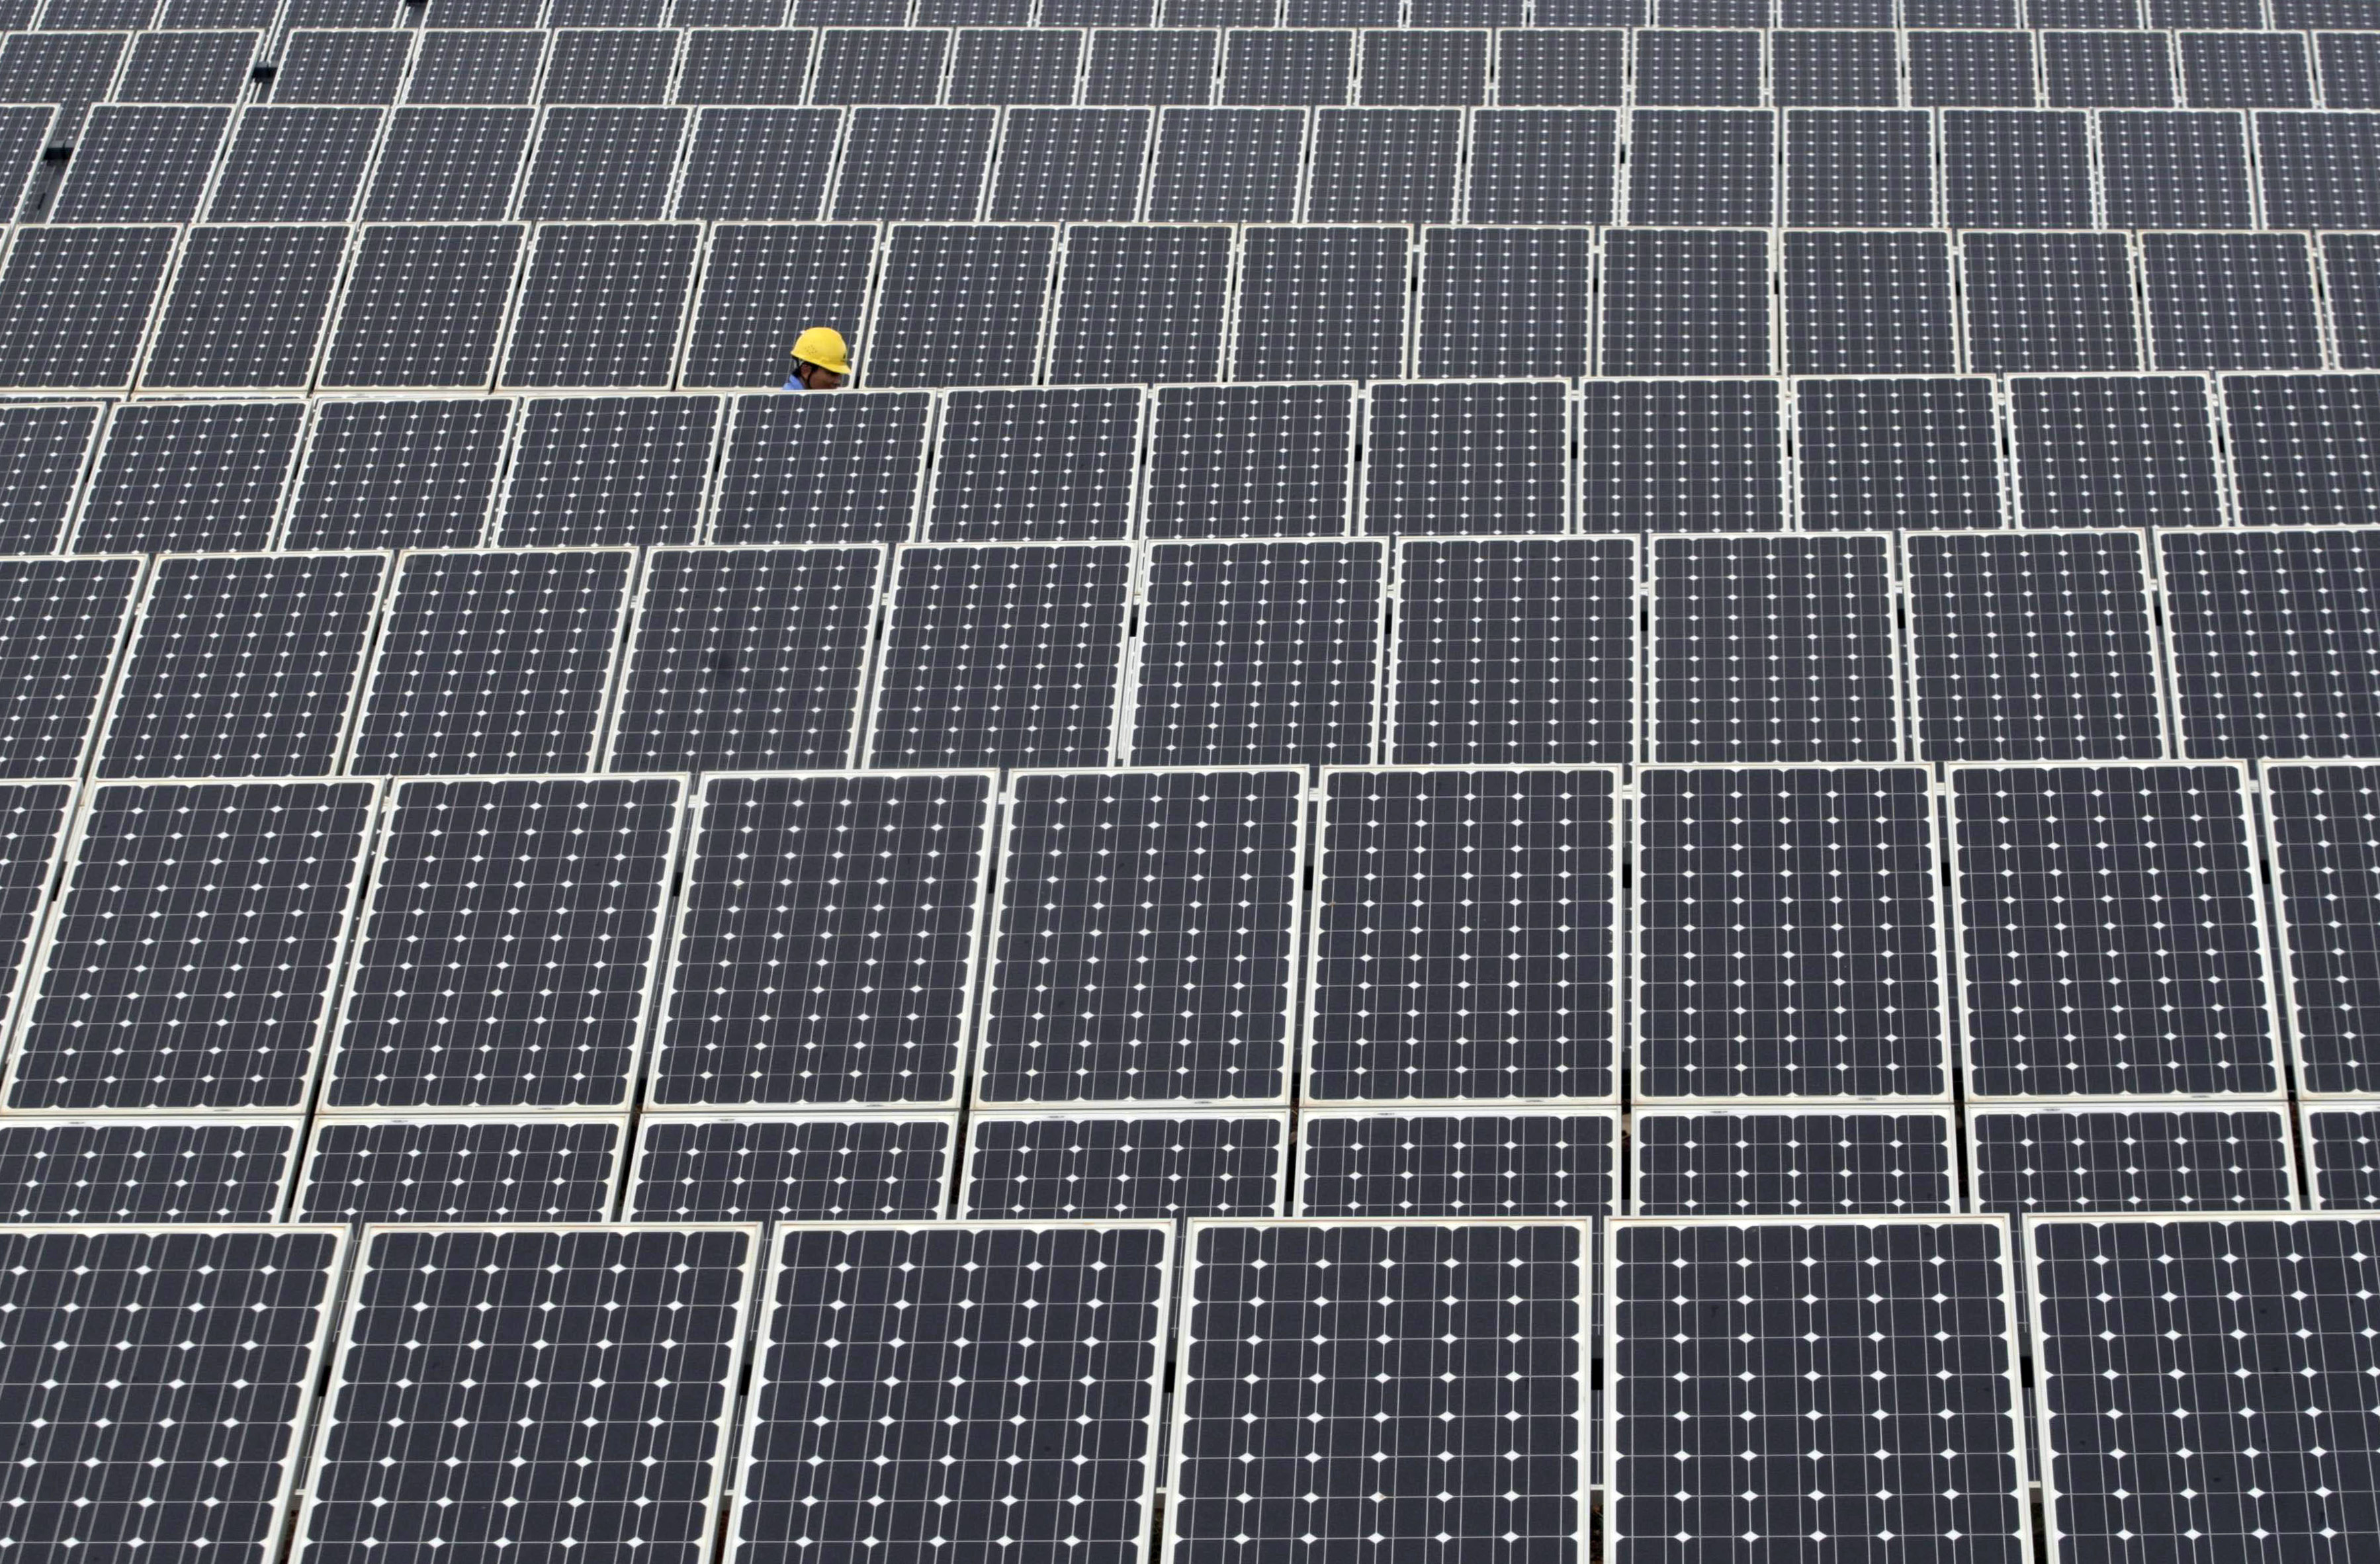 A labourer inspects solar panels at a solar power plant in Kunming